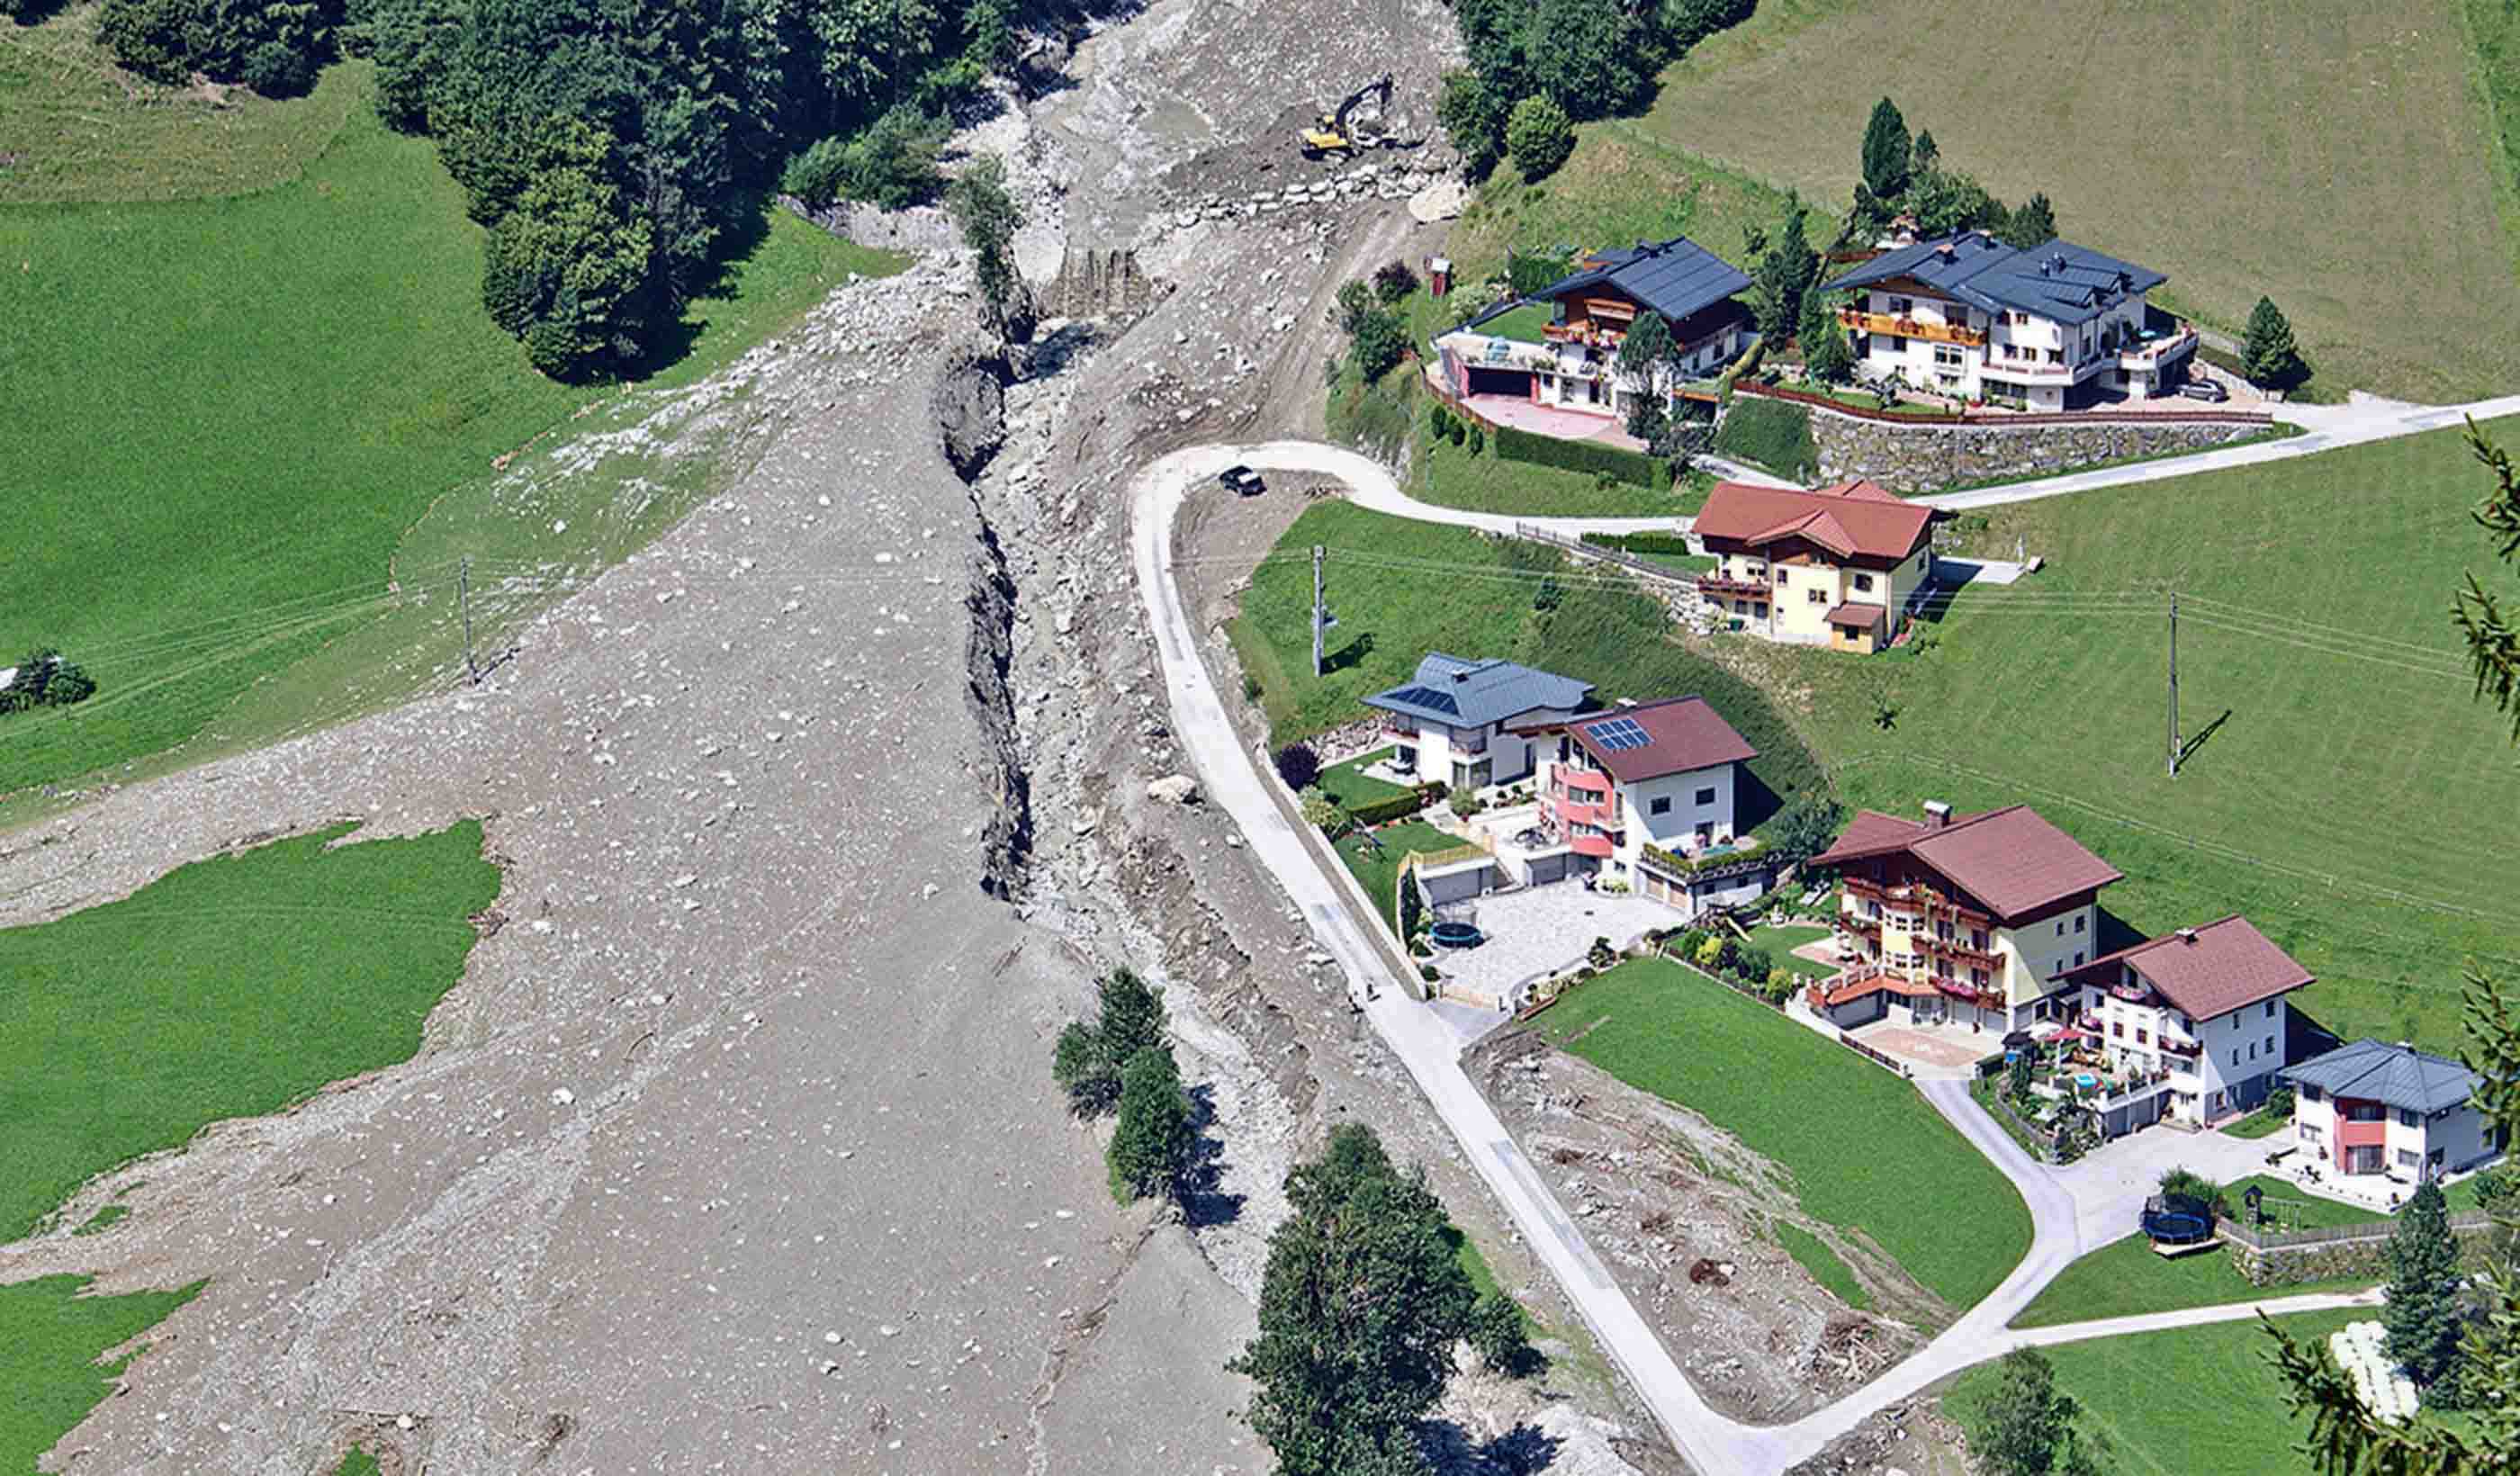 A new digital tool can help predict landslides, protecting people and infrastructure